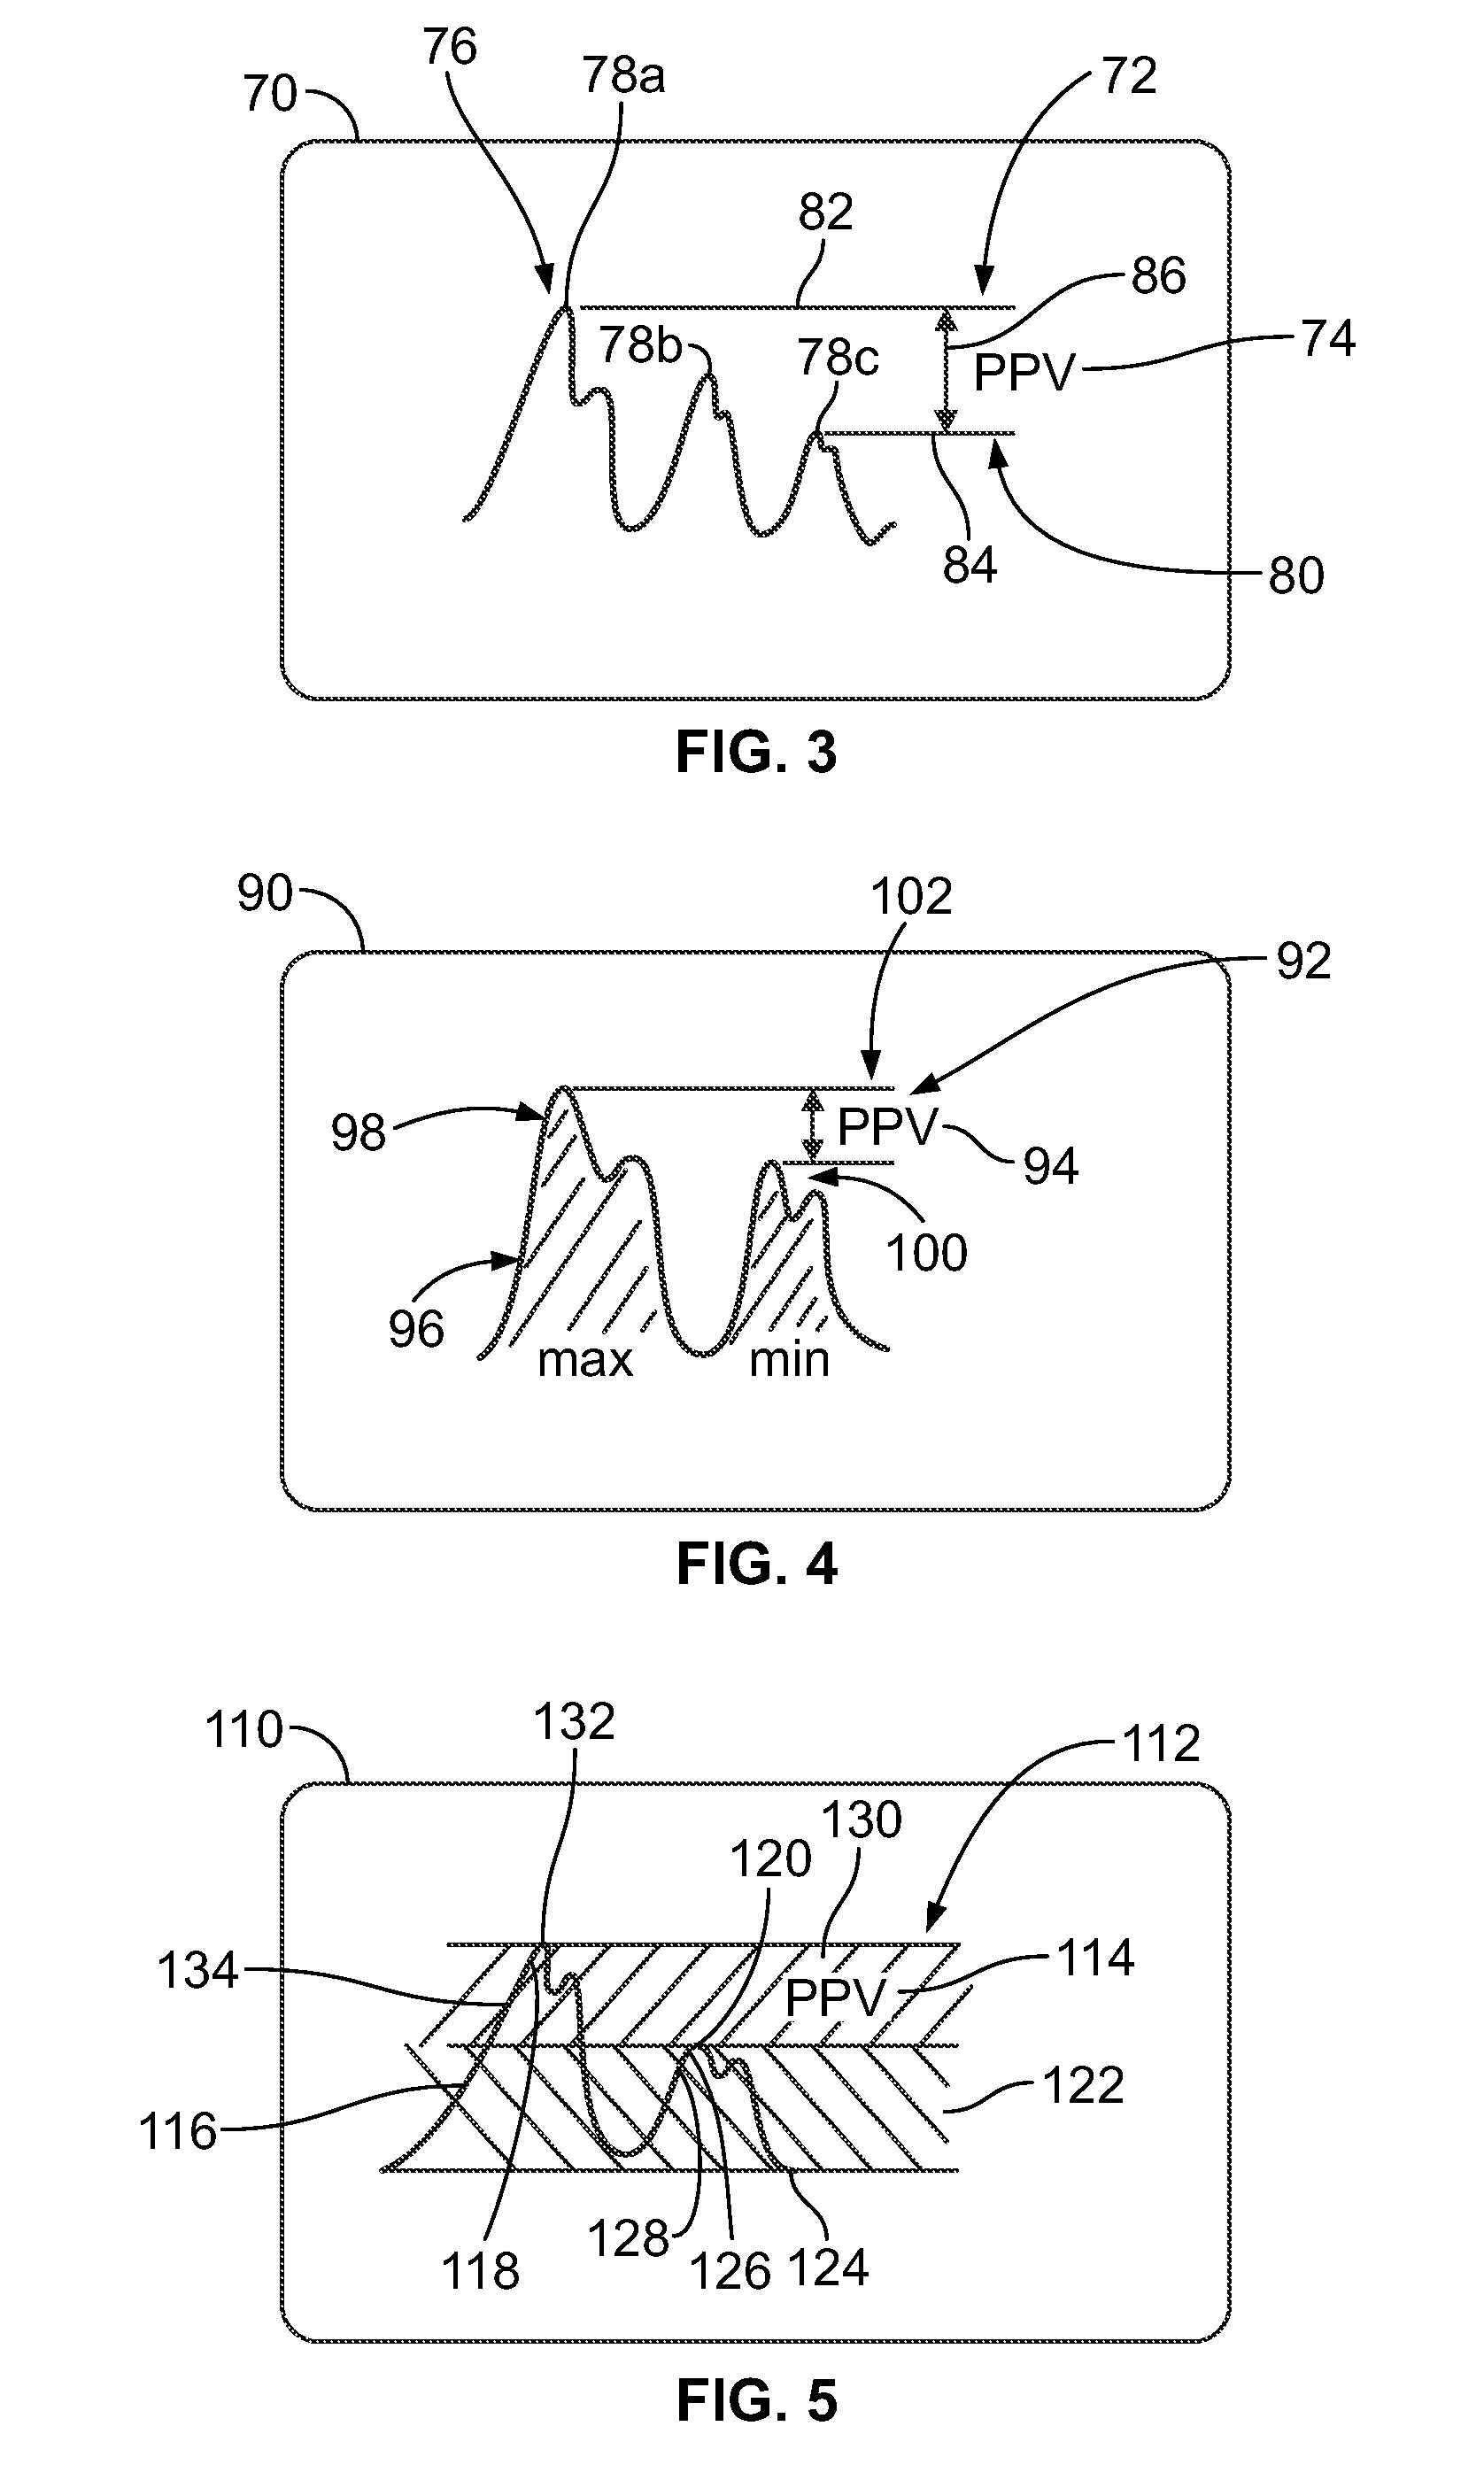 System and method for displaying fluid responsivenss predictors